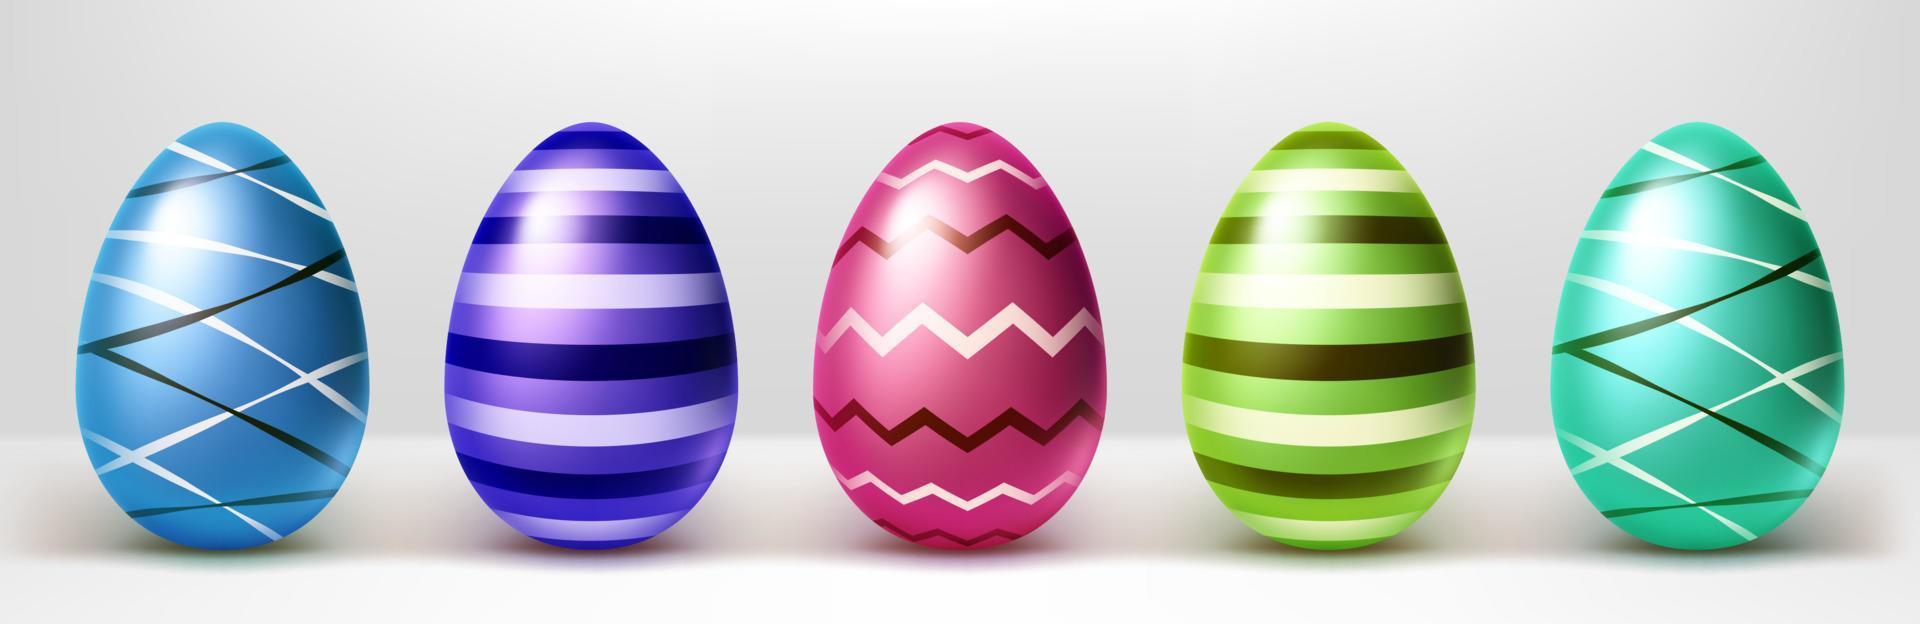 Colorful Easter eggs row, isolated vector objects